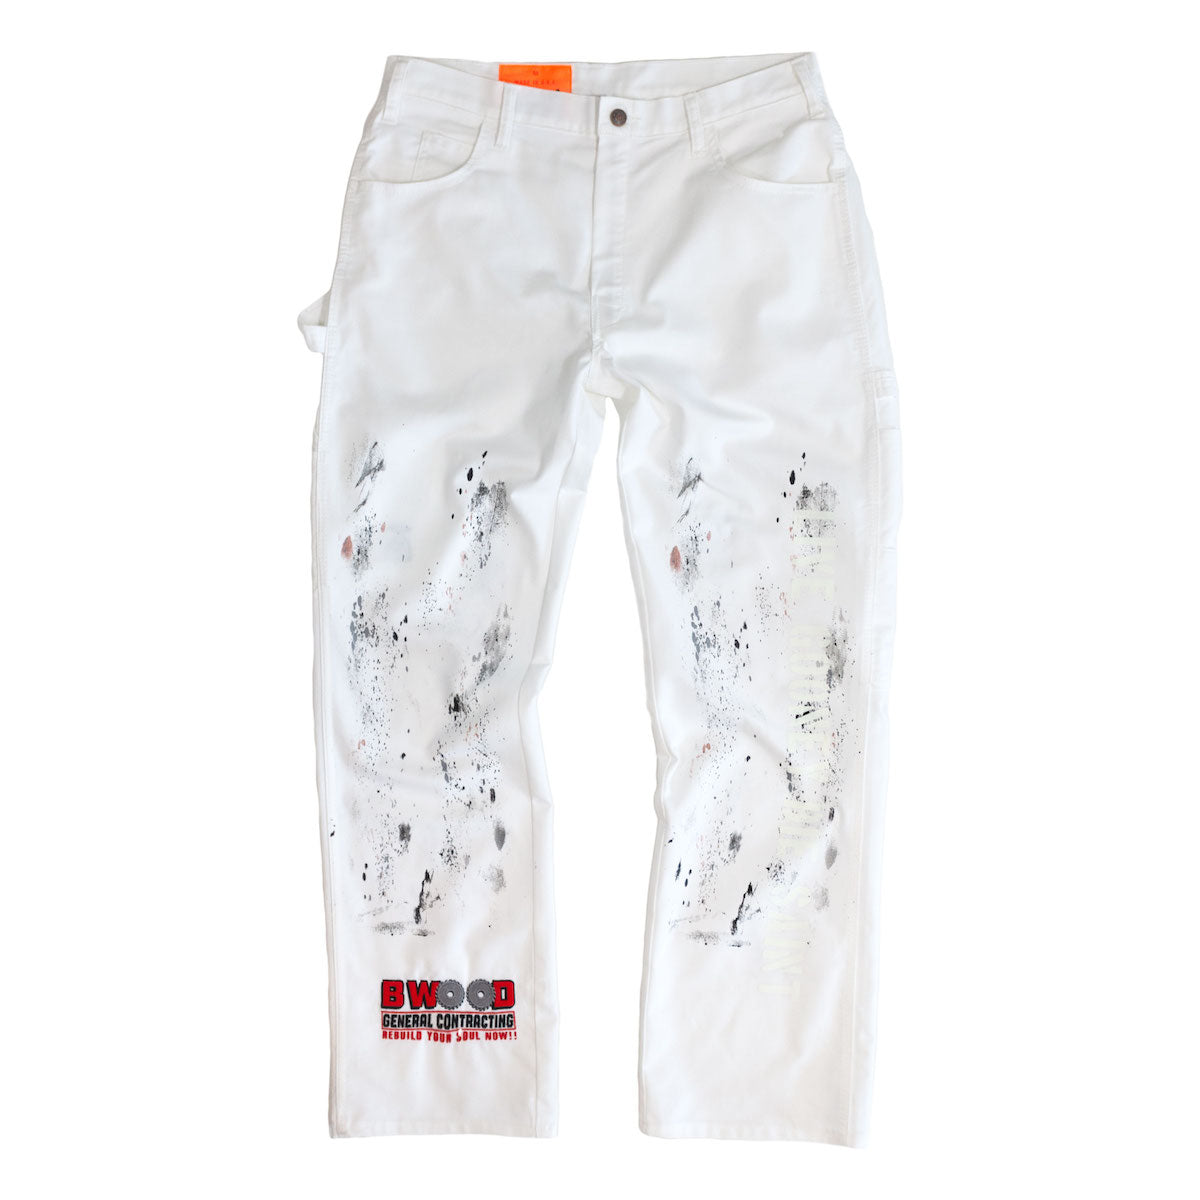 bwood contracting pant